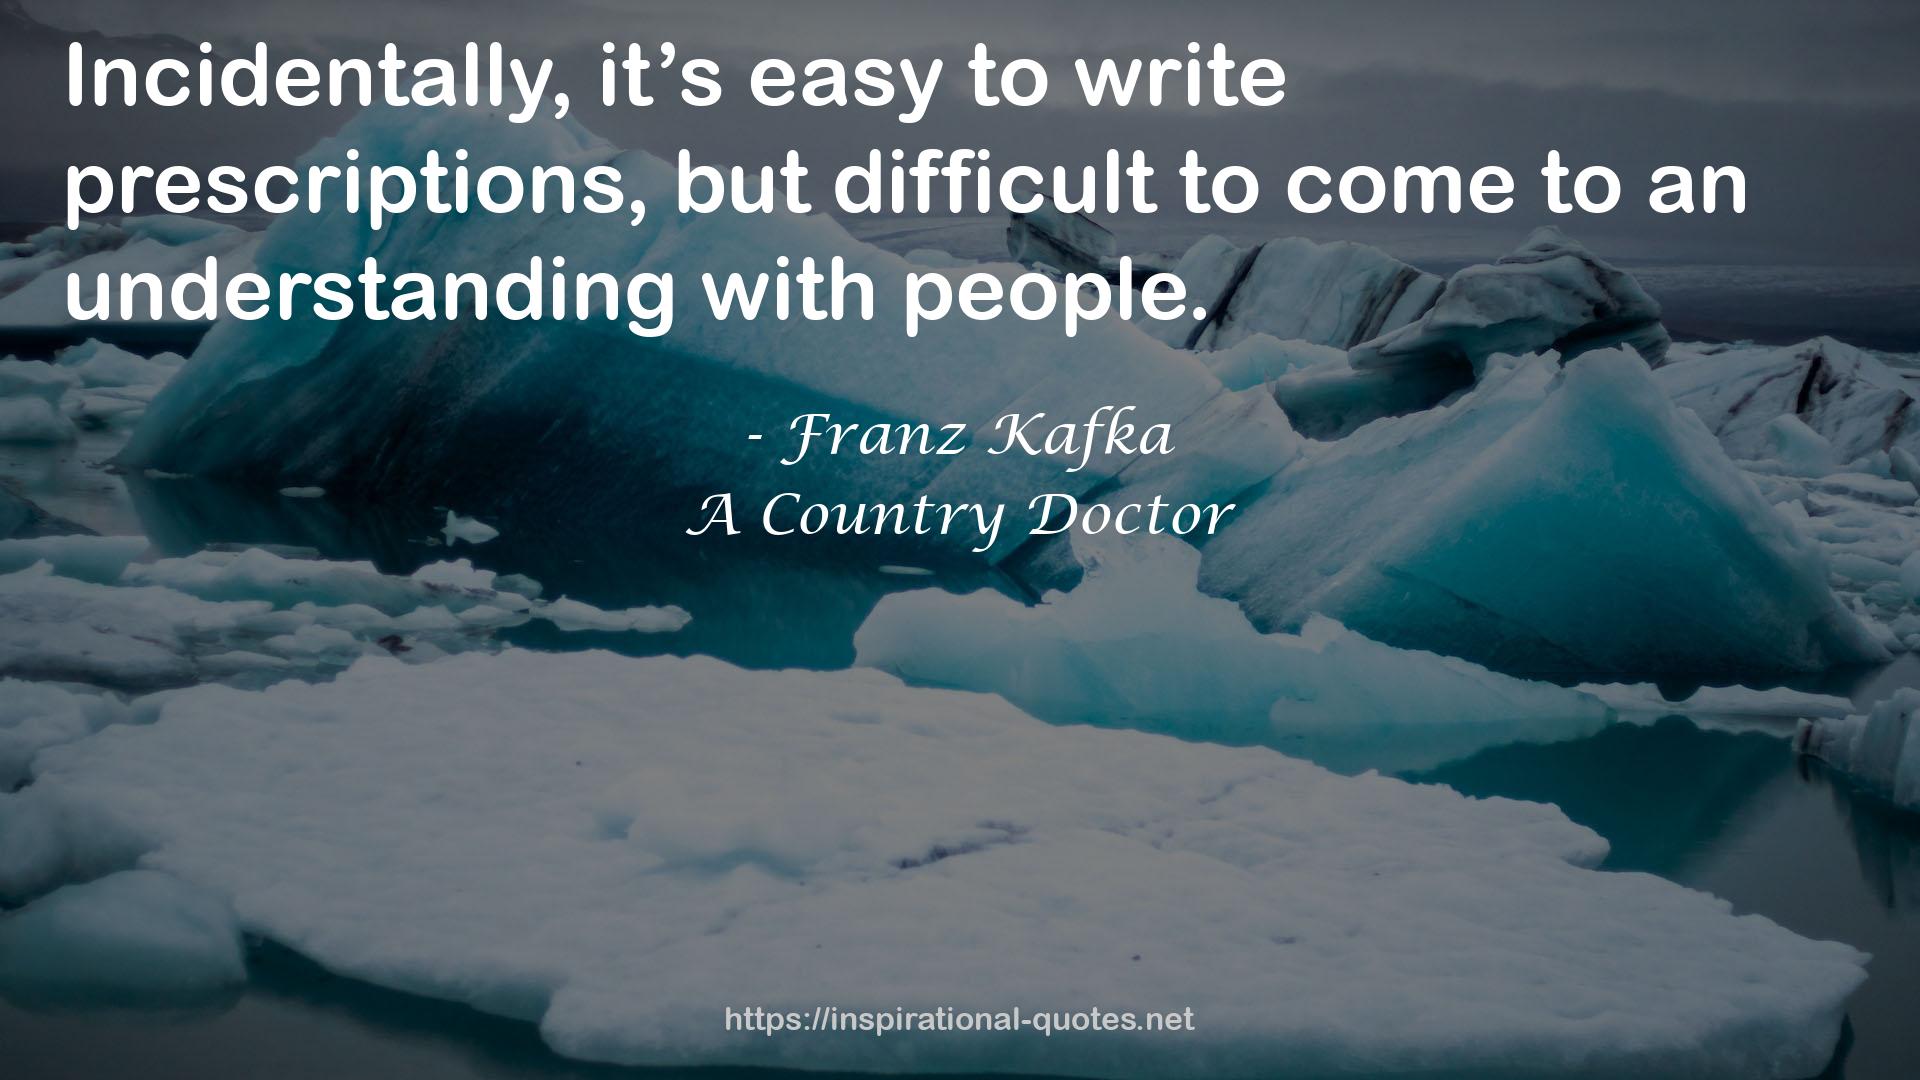 A Country Doctor QUOTES